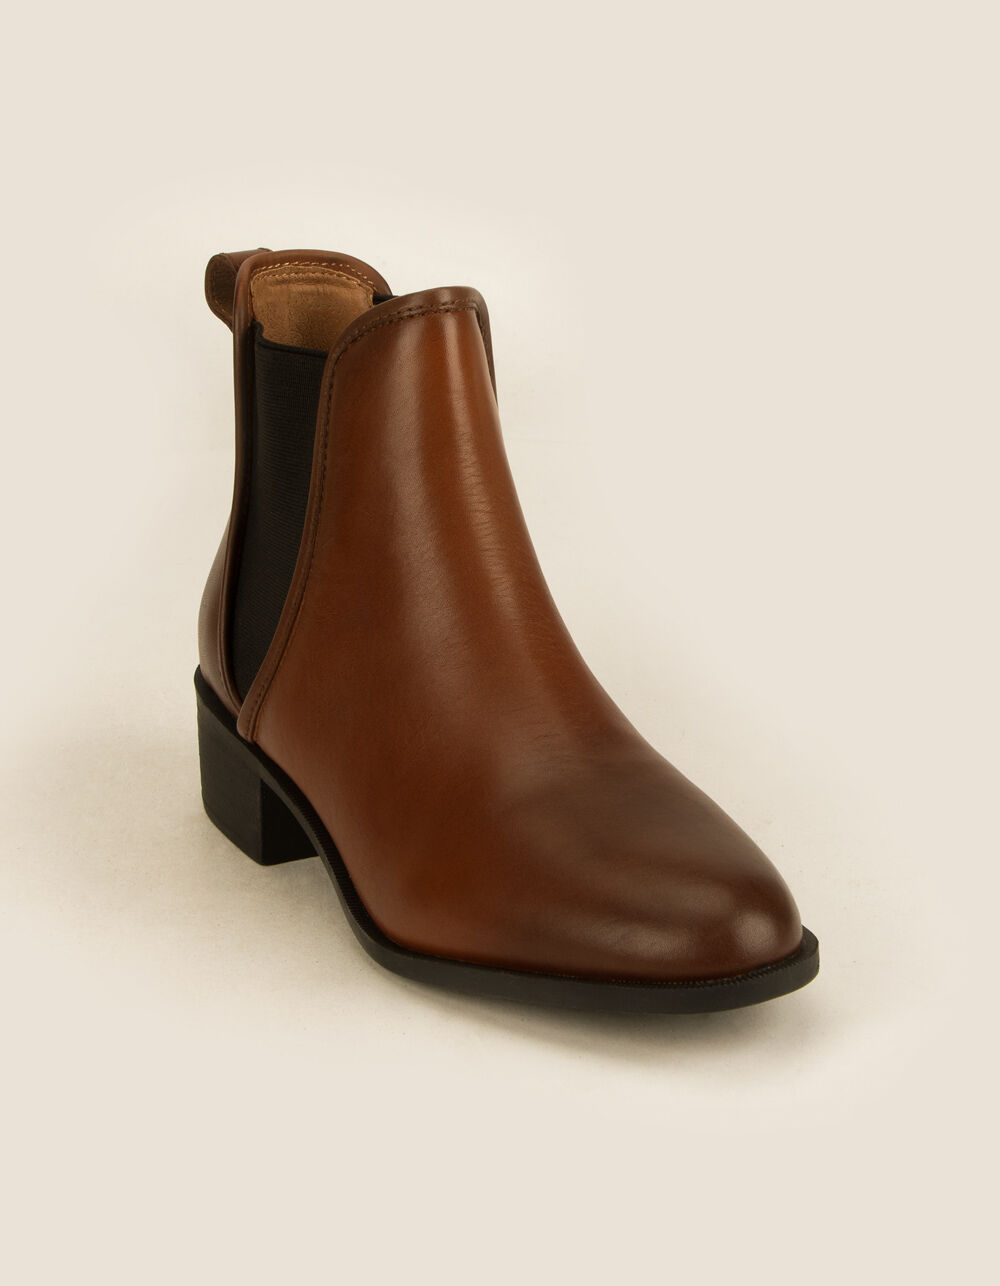 STEVE MADDEN Dares Leather Chelsea Boots